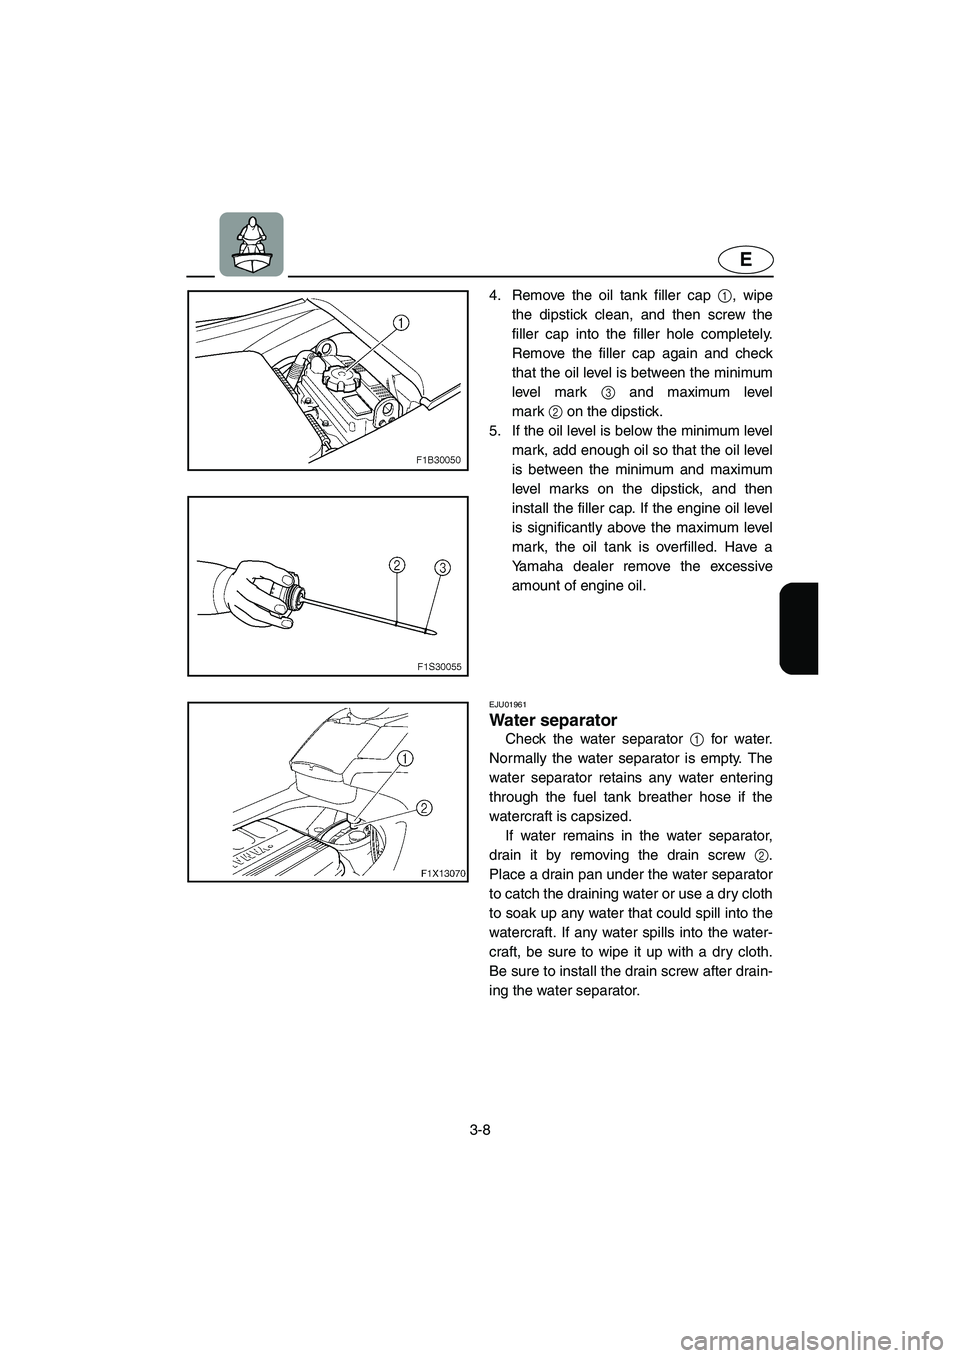 YAMAHA FX CRUISER 2006 Repair Manual 3-8
E
4. Remove the oil tank filler cap 1, wipe
the dipstick clean, and then screw the
filler cap into the filler hole completely.
Remove the filler cap again and check
that the oil level is between t